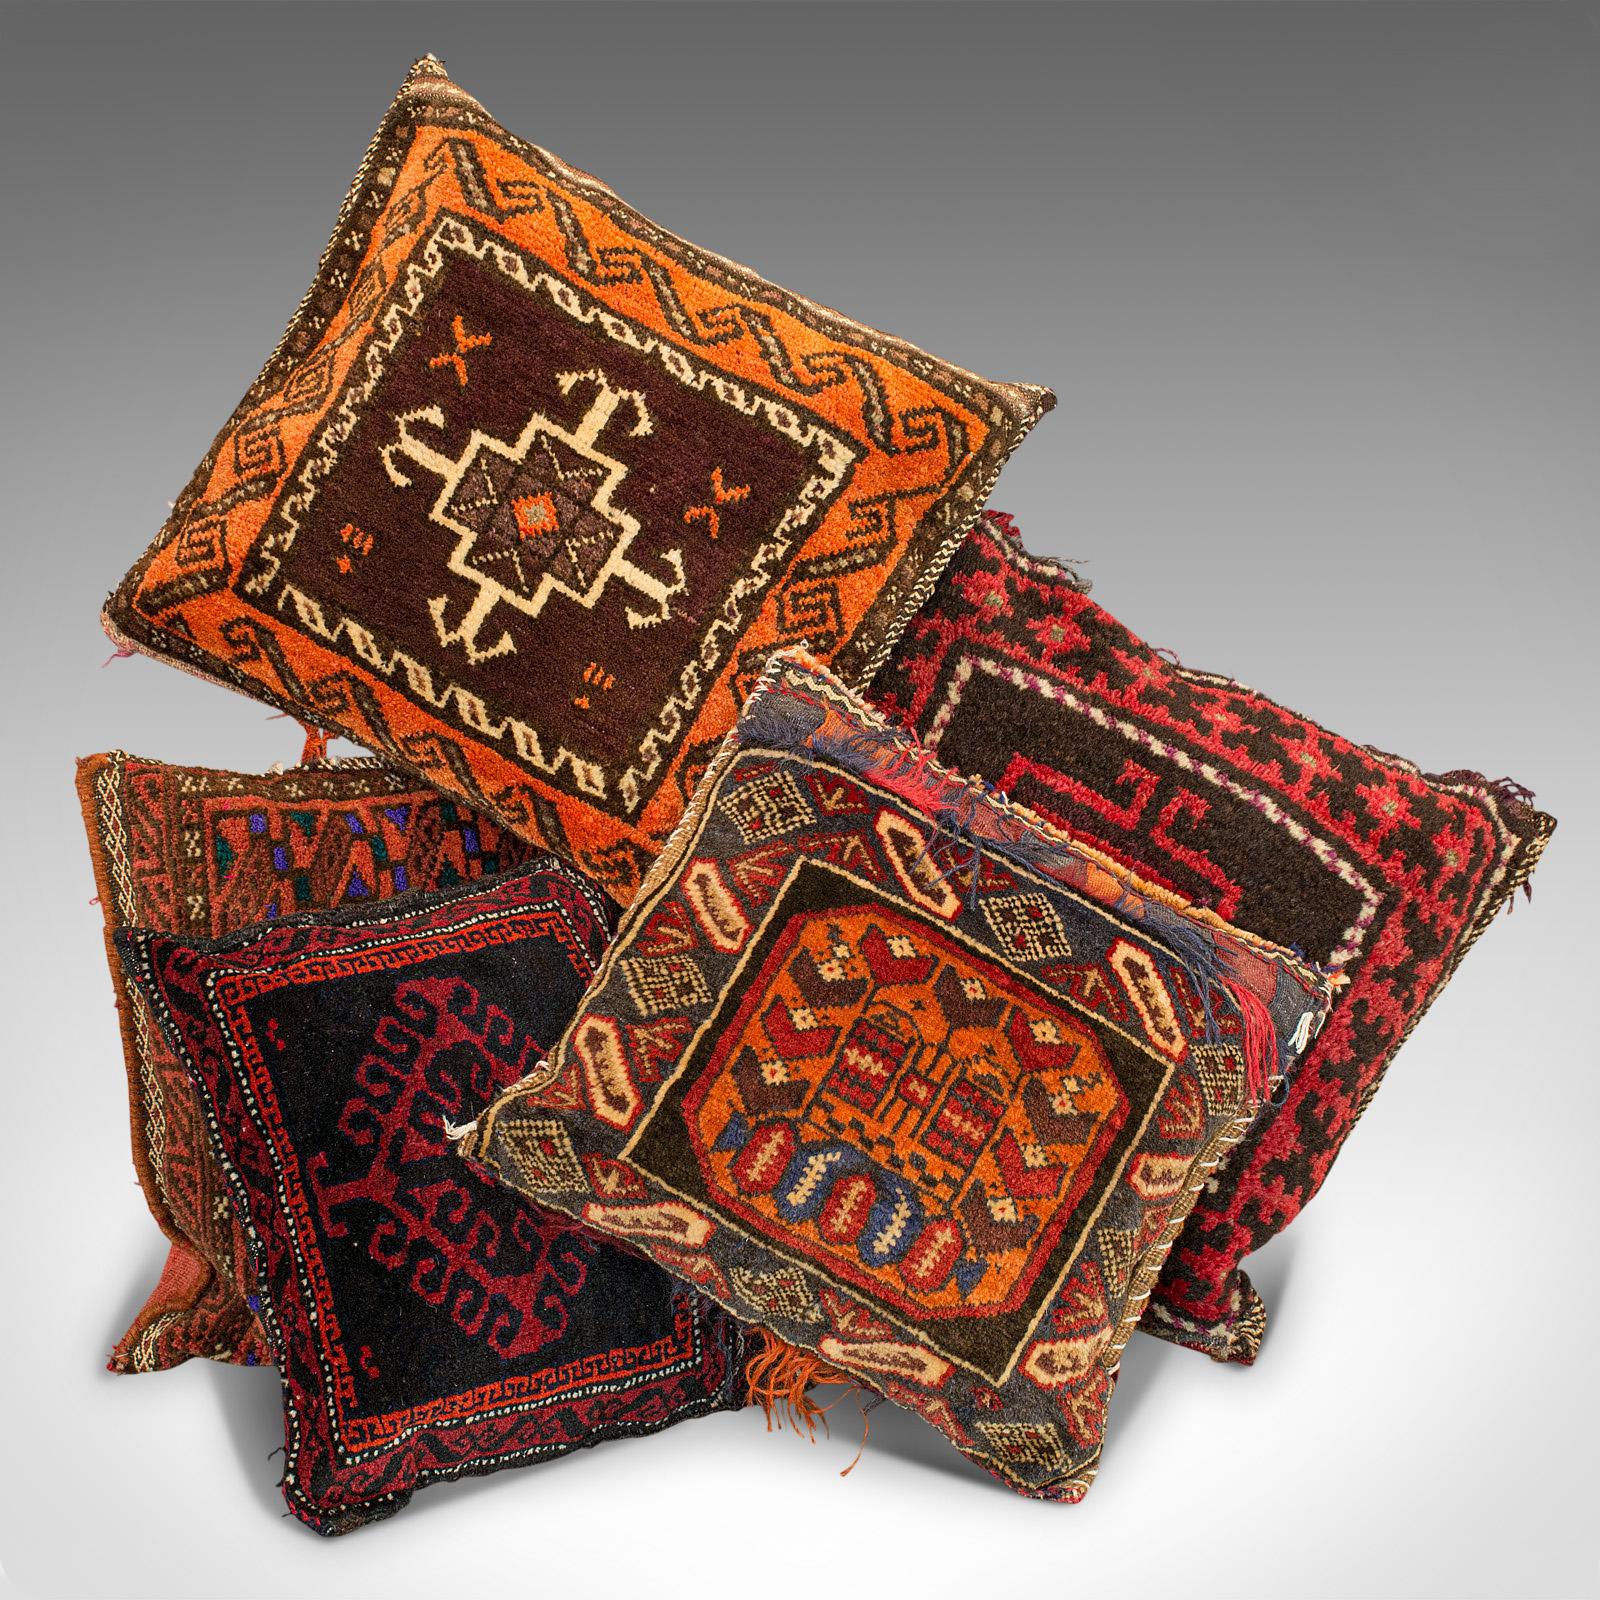 This is a set of 5 vintage Kilim cushions. A North African quintet of camel bag throw pillows, dating to the mid-20th century, circa 1950.

Add a dash of Casablanca glamour to your lounge
Displaying a desirable aged patina to each